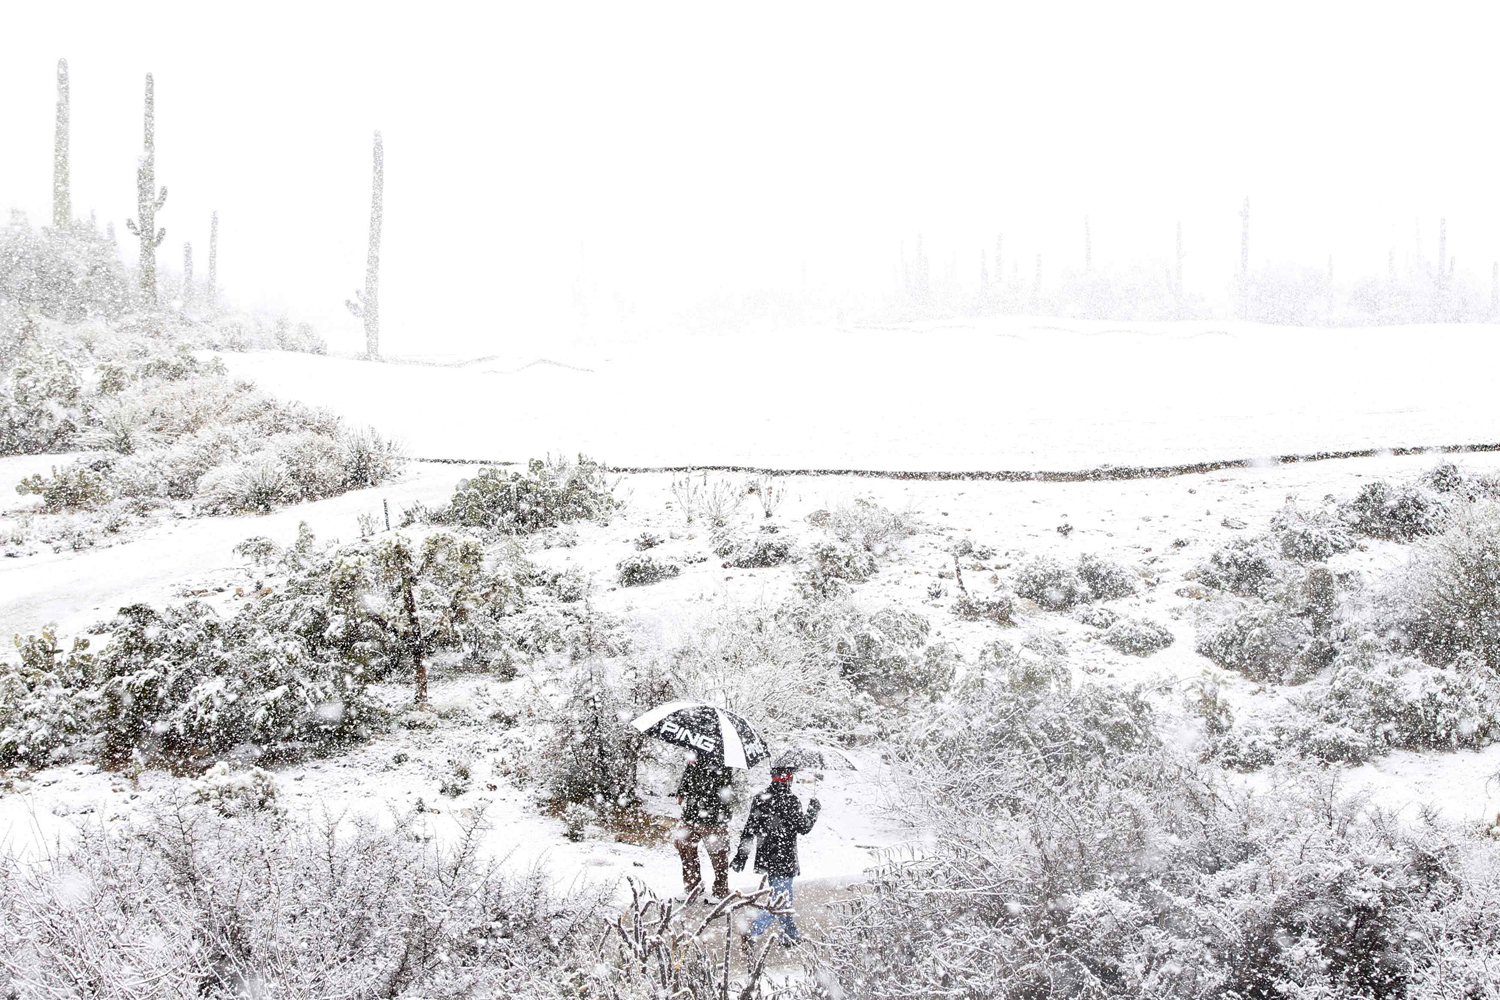 Golf spectators look for cover as snow forces suspension of play during the first round of the WGC-Accenture Match Play Championship golf tournament in Marana